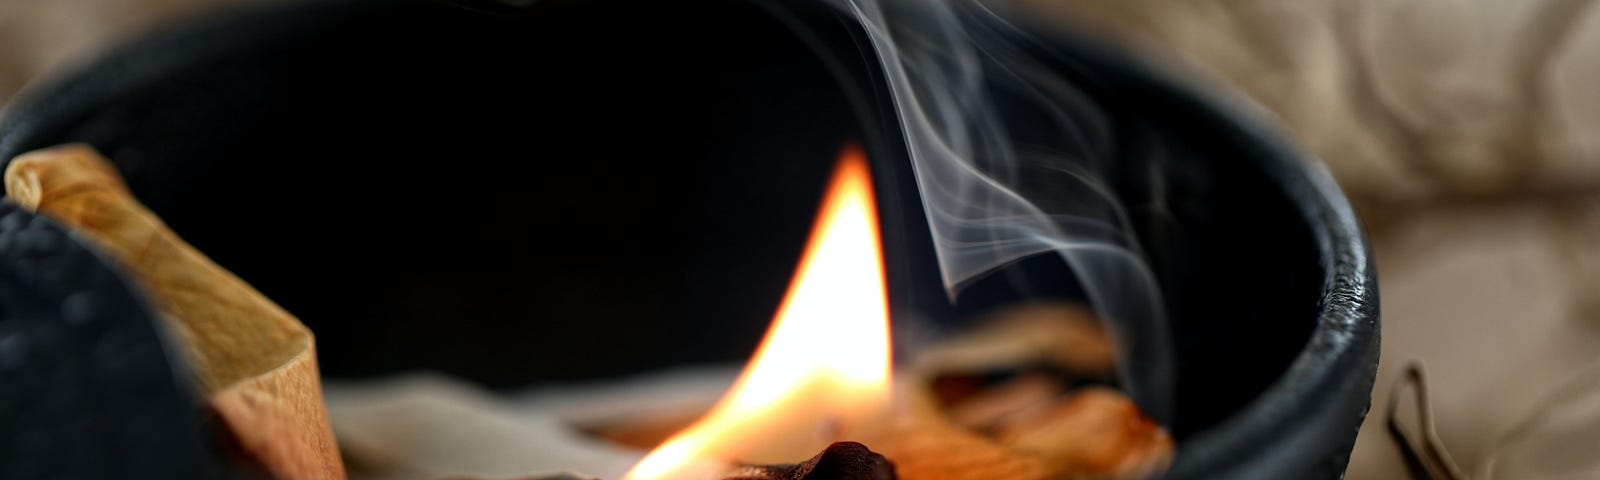 A flame and smoke in a black bowl